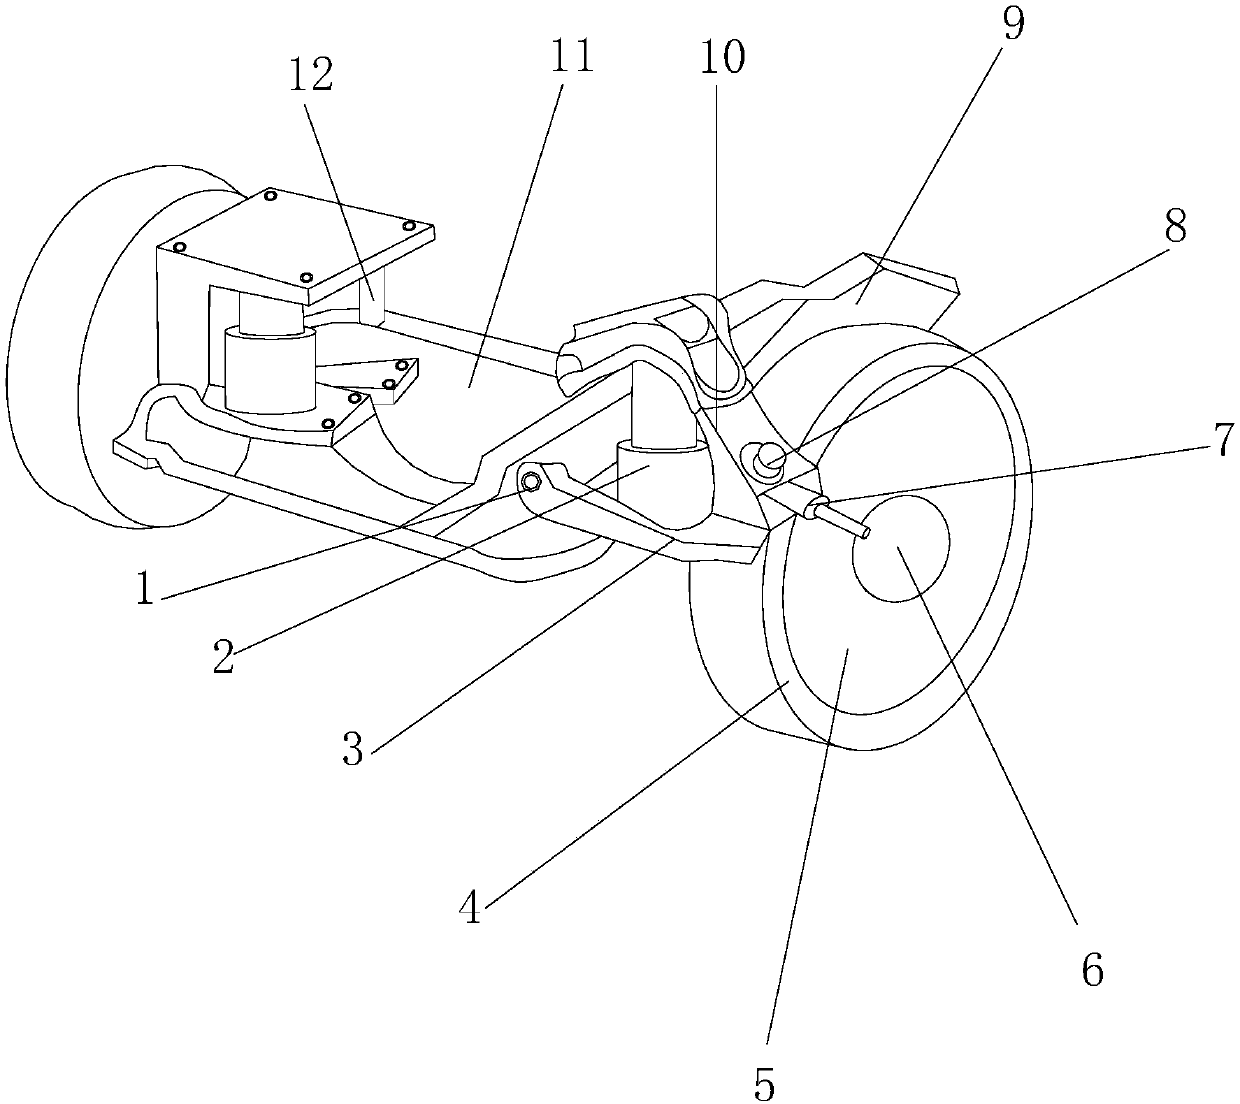 Cab rear-suspended damper limiting protection device